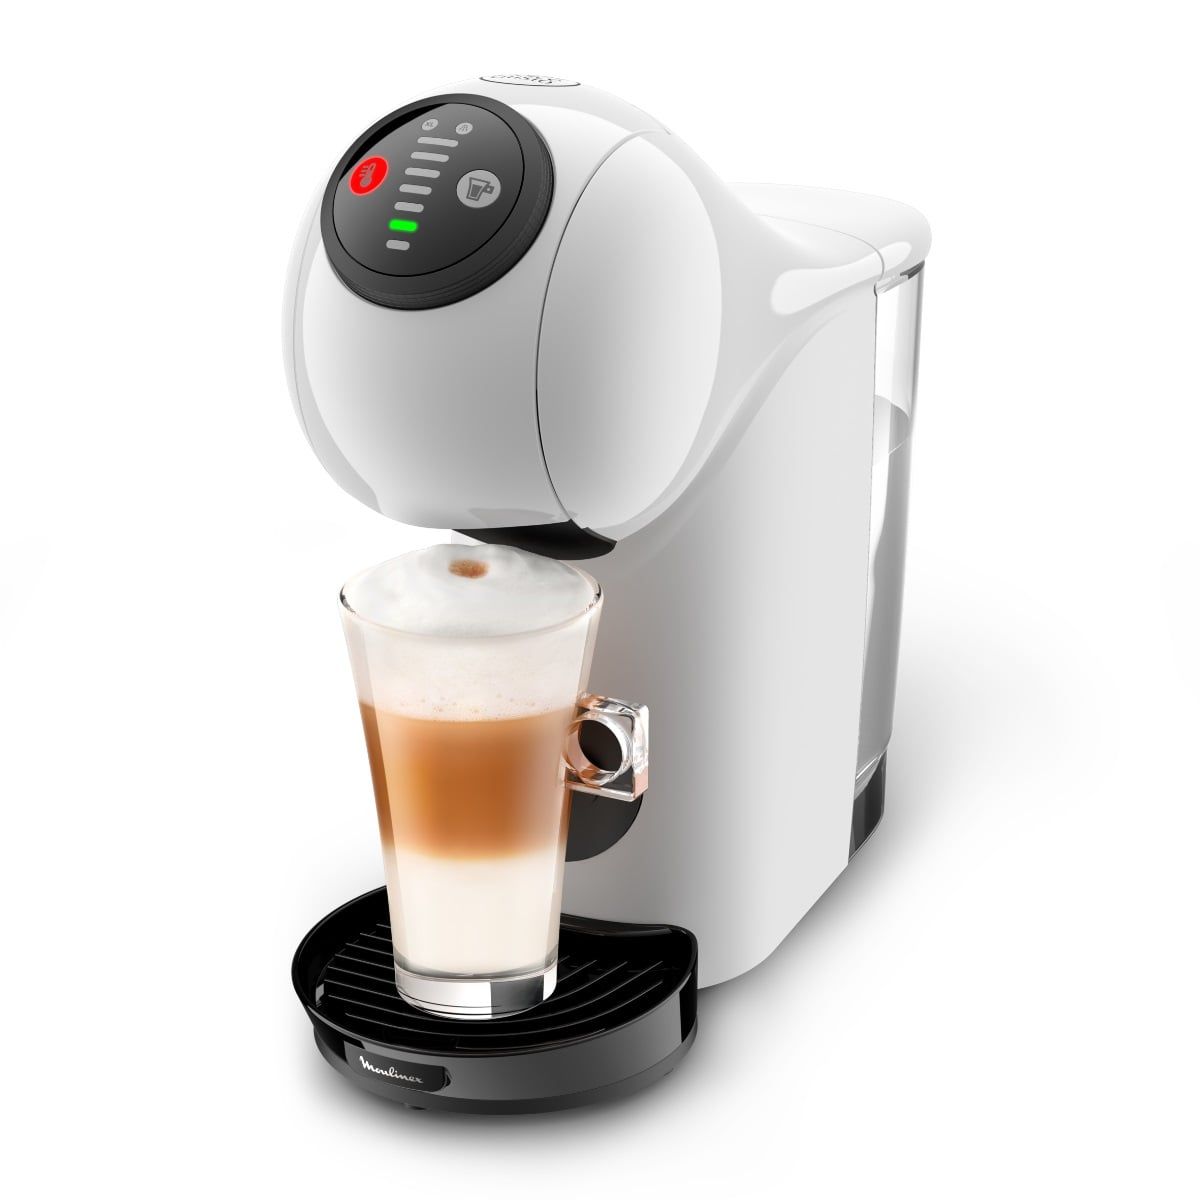 Cafetera Dolce Gusto Genio 2 Moulinex PV1605